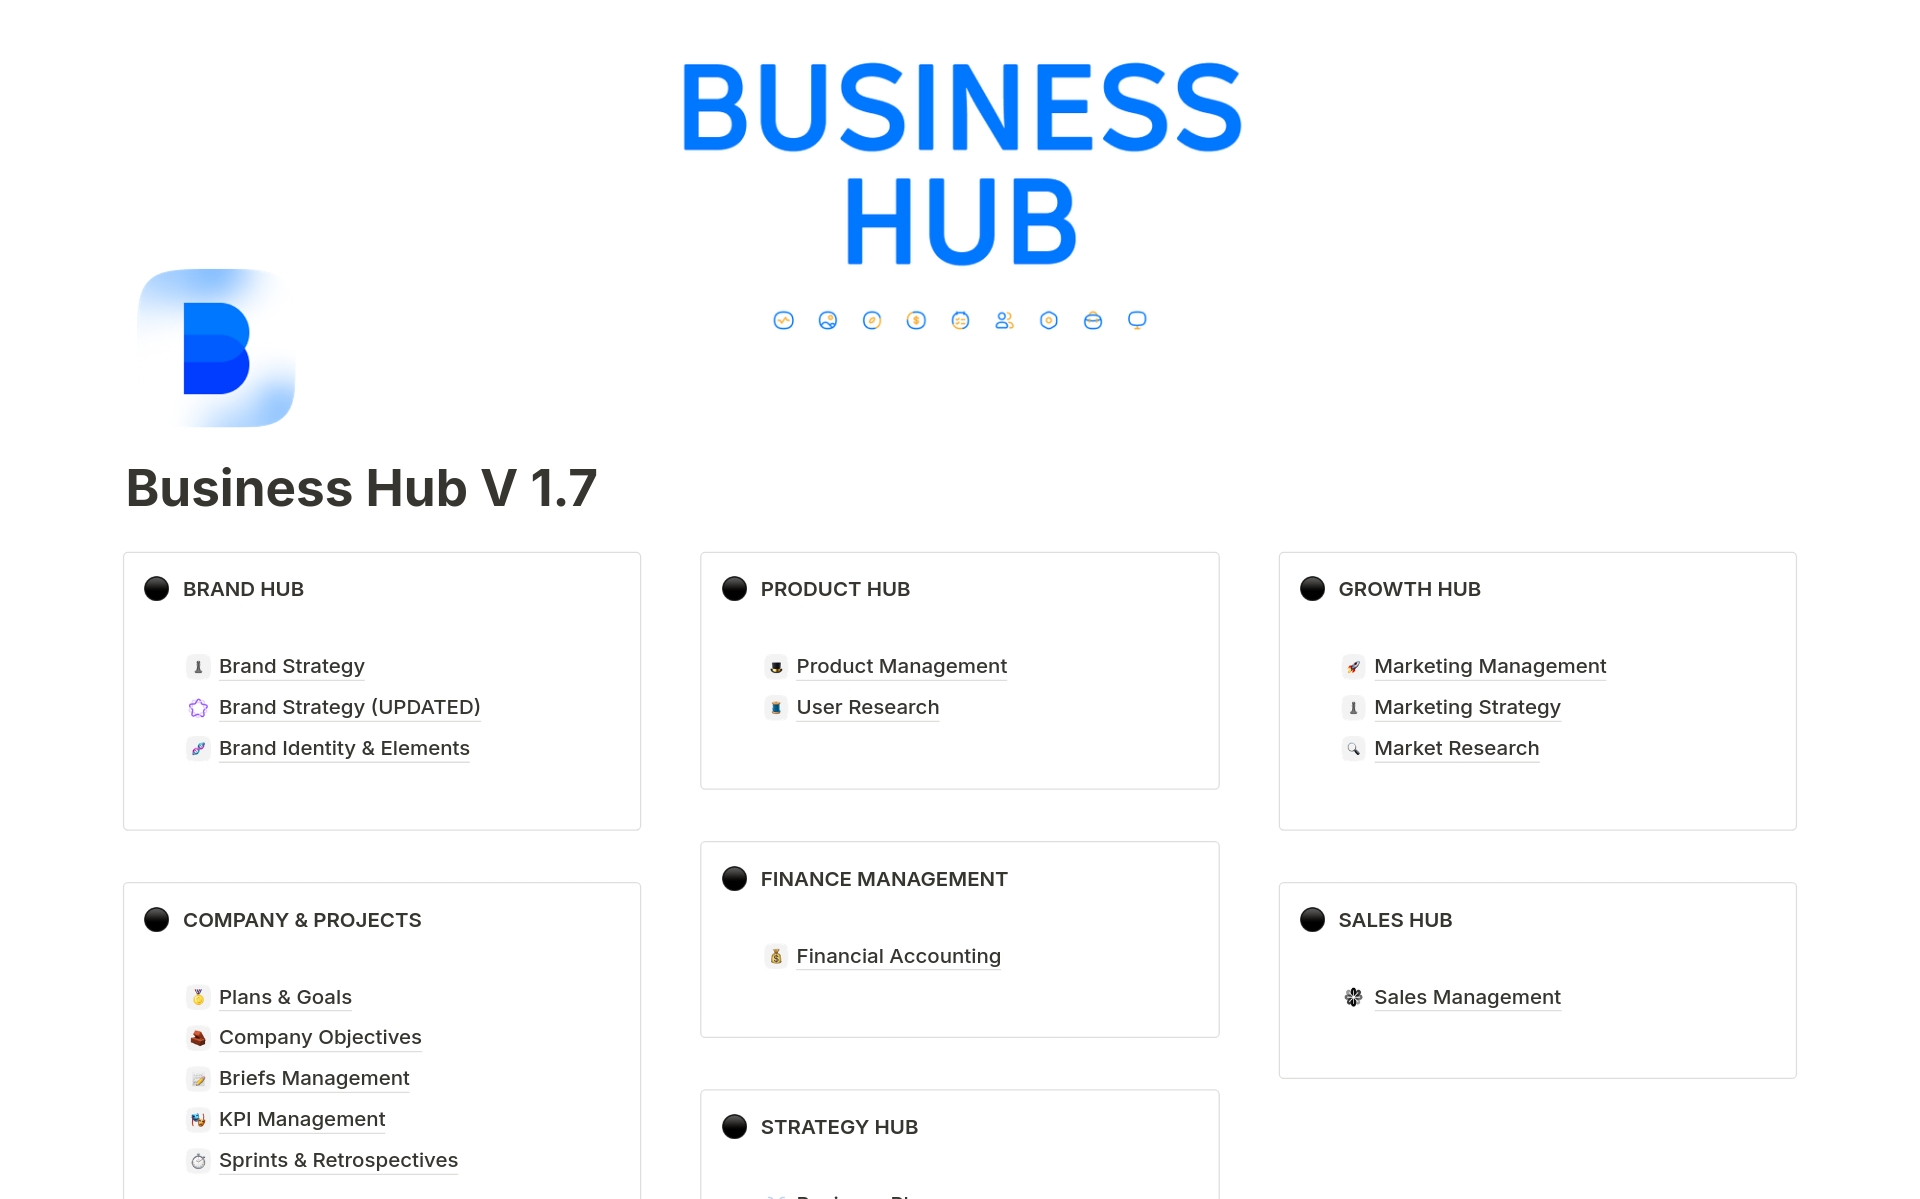 Business Hub provides a workspace for businesses to manage their brand, products, growth, finances, and more.